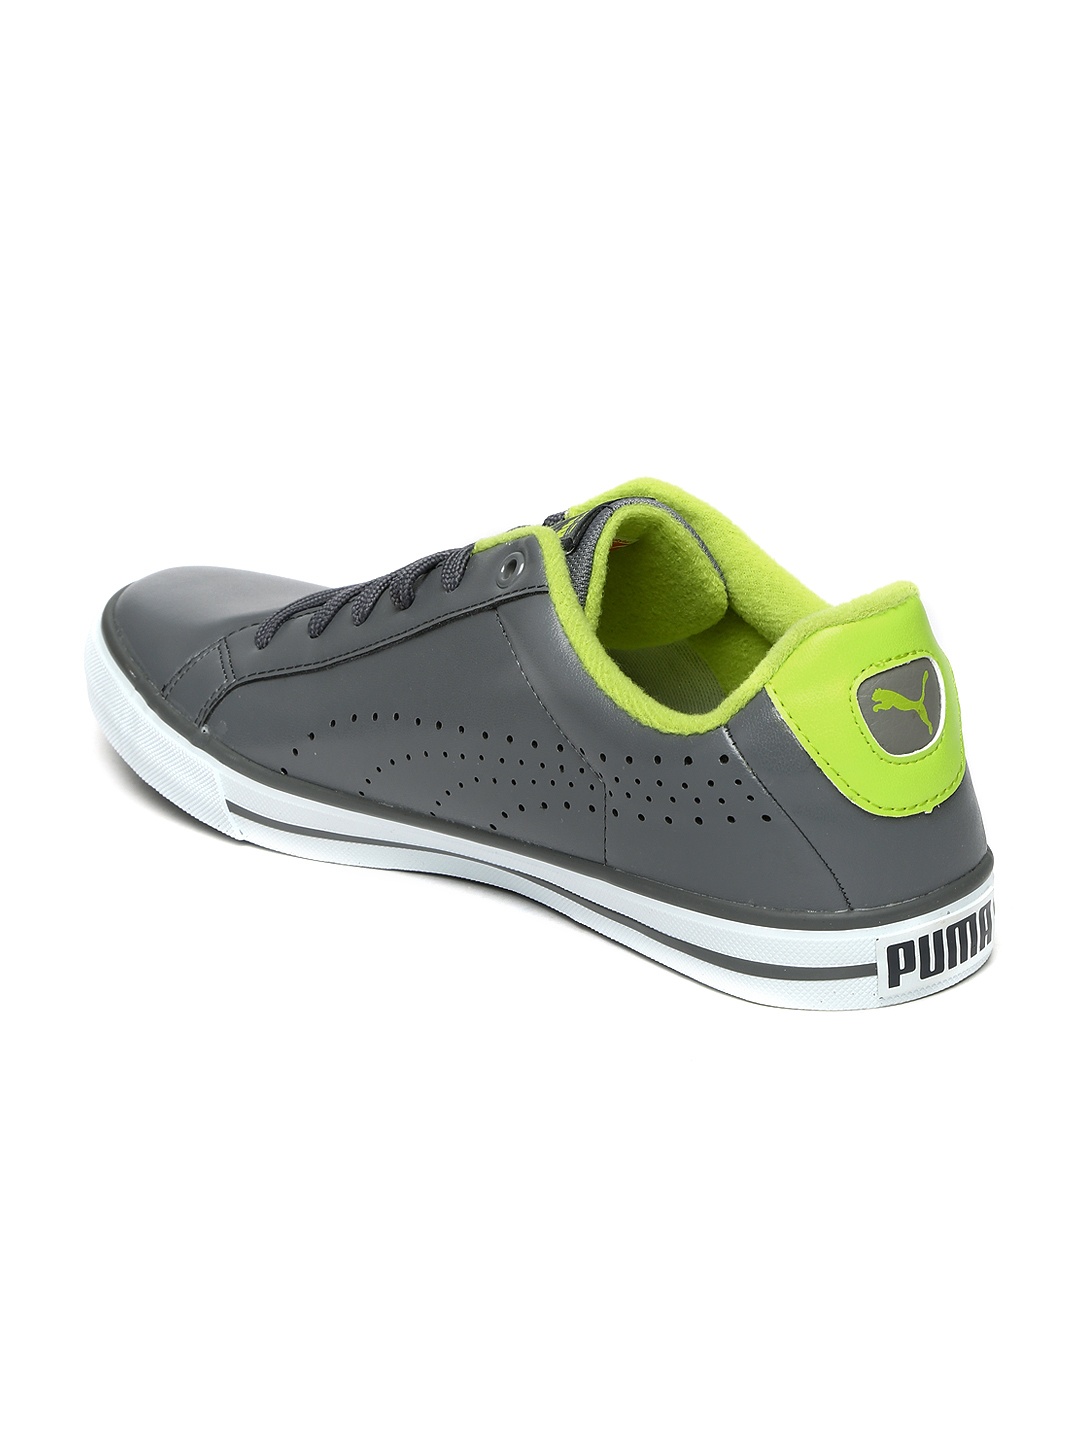 myntra safety shoes